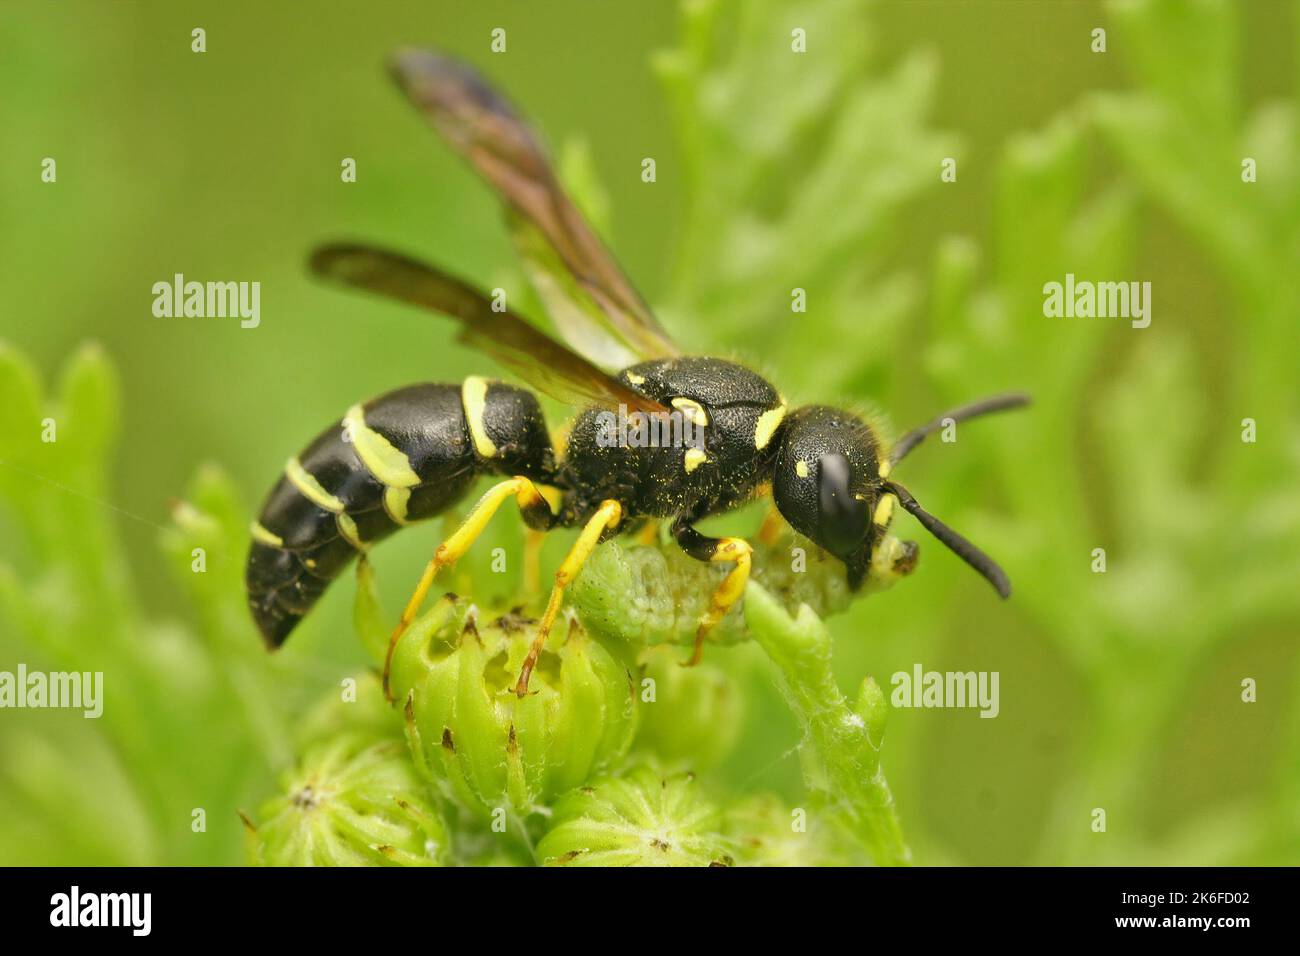 A closeup of Ancistrocerus wasp sipping nectar from flower isolated in blurred background Stock Photo